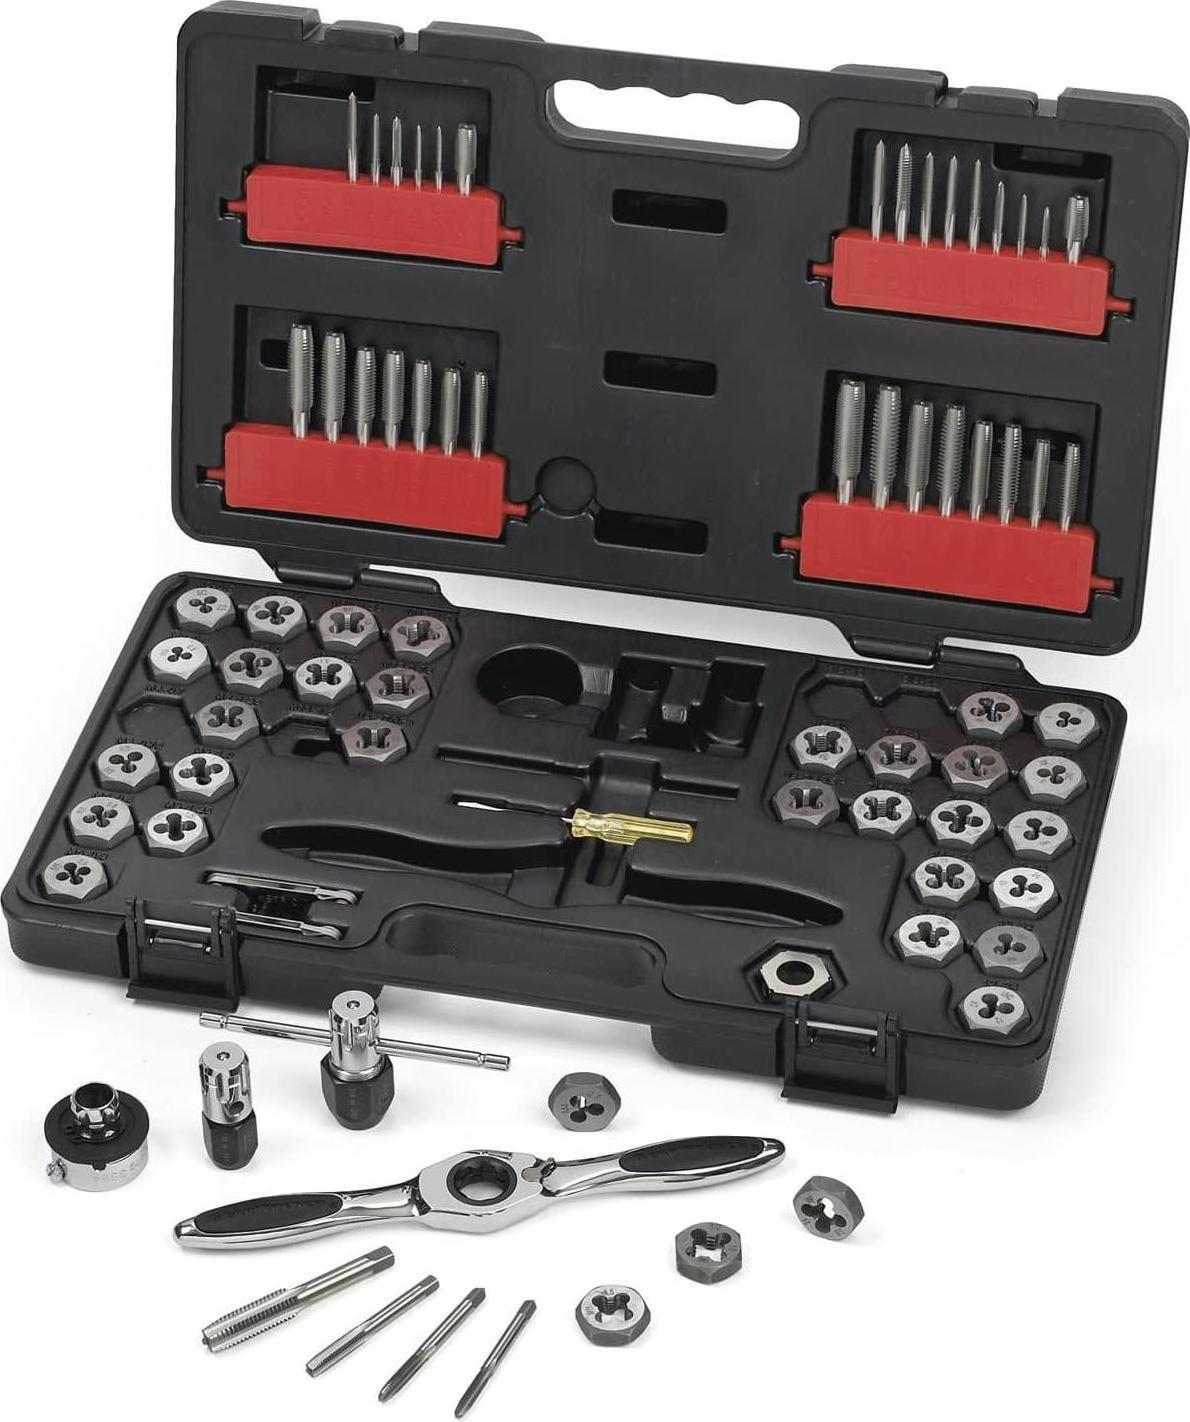 GEARWRENCH, GearWrench 3887 Tap and Die 75 Piece Set - Combination SAE/Metric